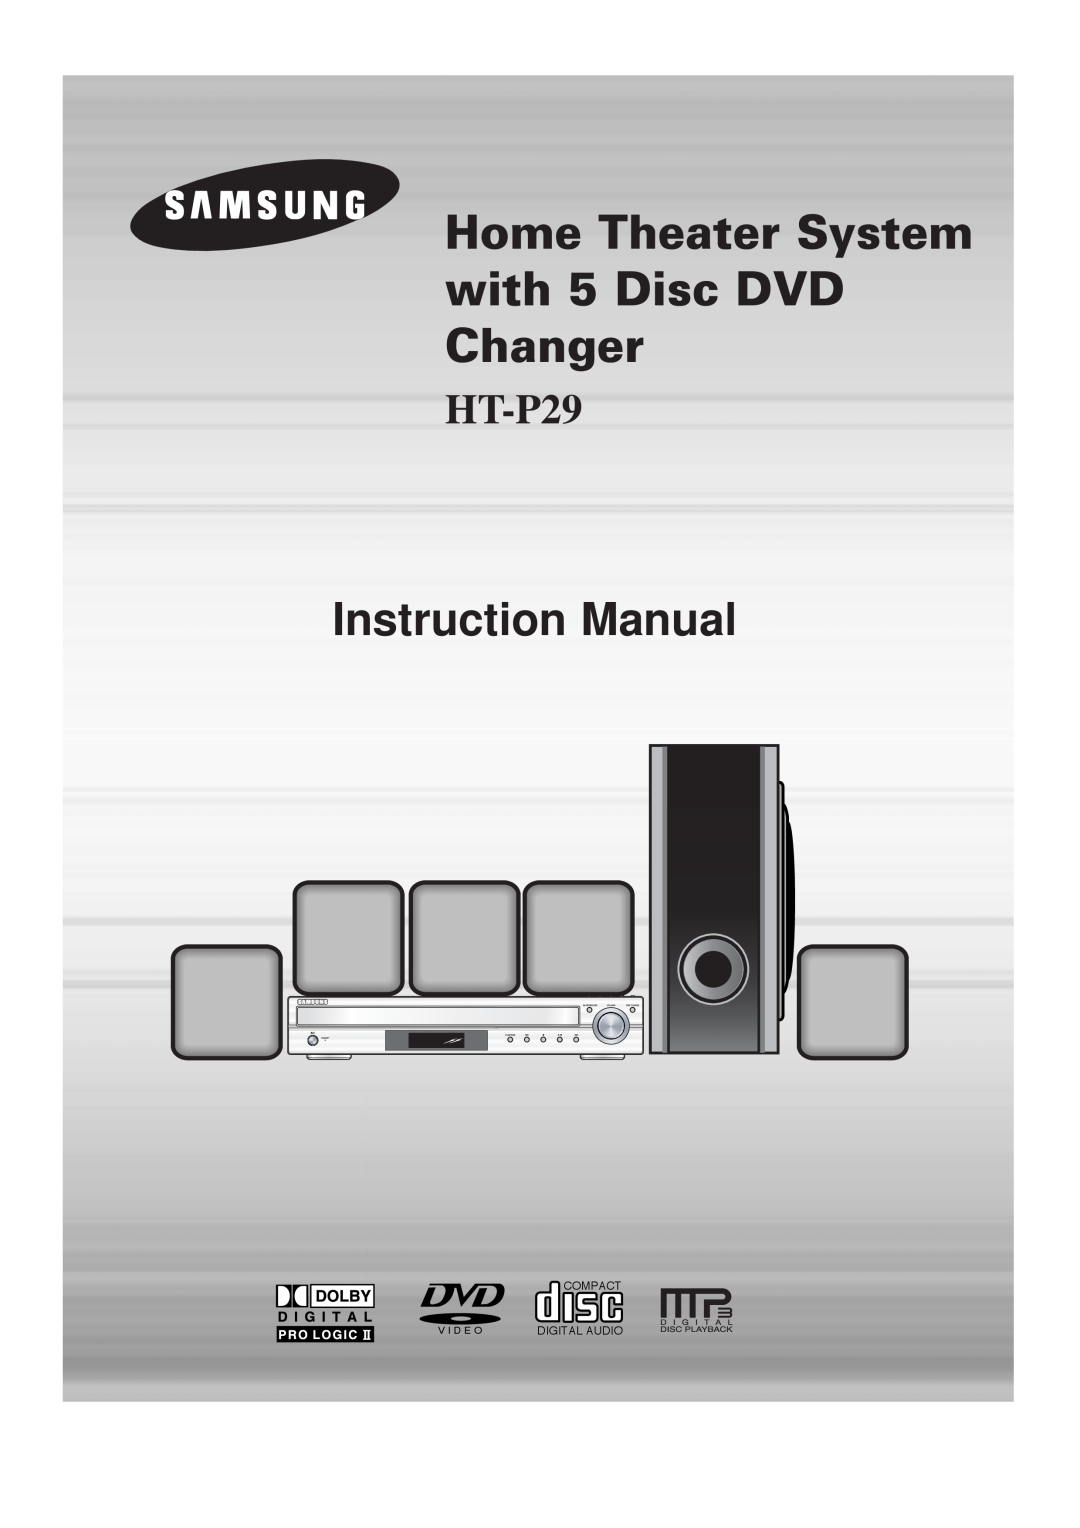 Samsung AH68-01701V manual Home Theater System with 5 Disc DVD Changer, HT-P29, Compact, Digital Audio, V I D E O 